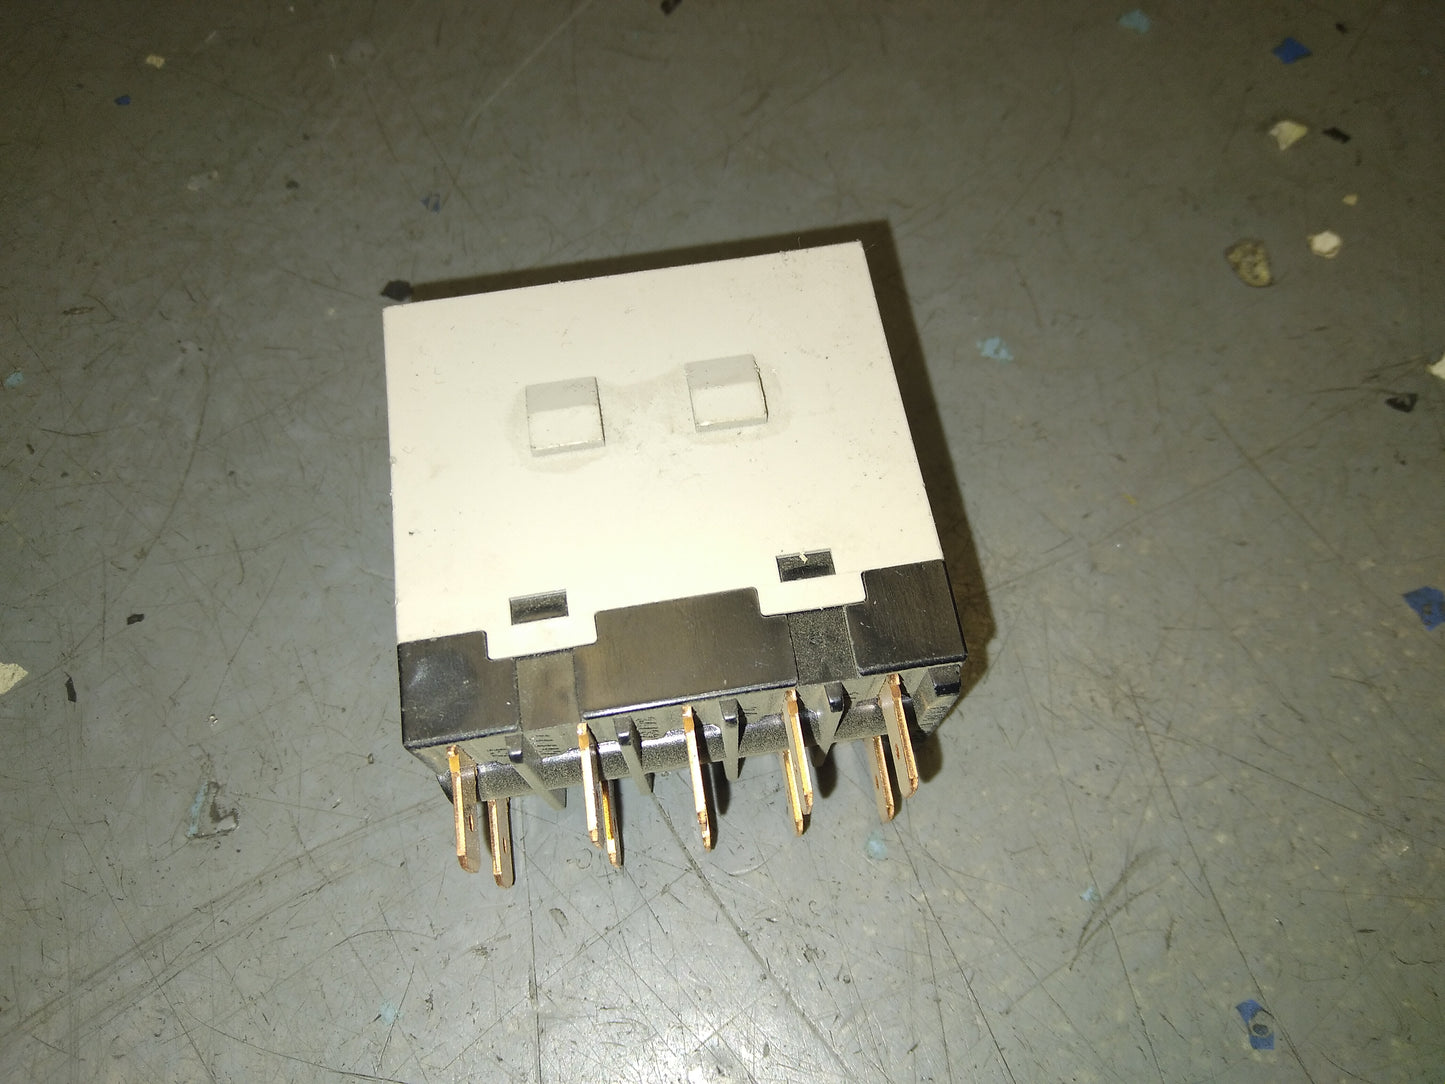 RELAY 4PST NO QUICK CONNECT 25A 277VAC 